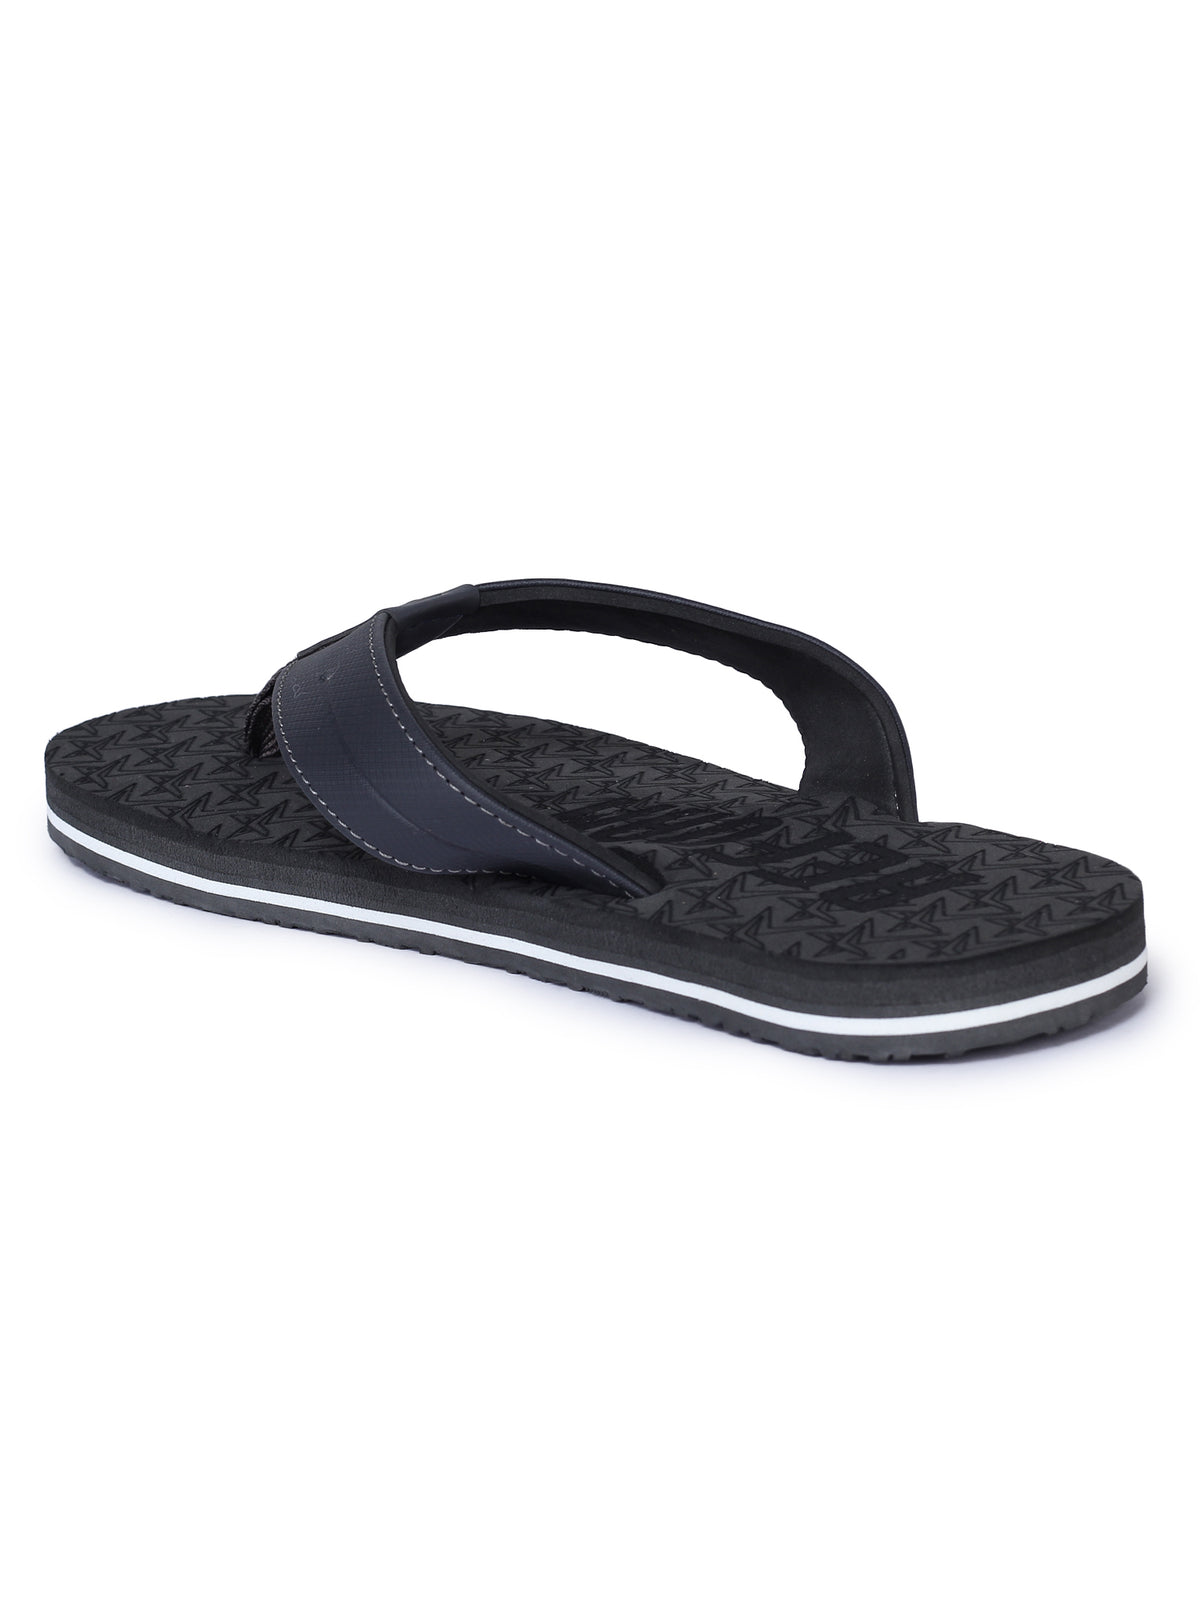 Black Solid Rubber Slip On Casual Slippers For Men